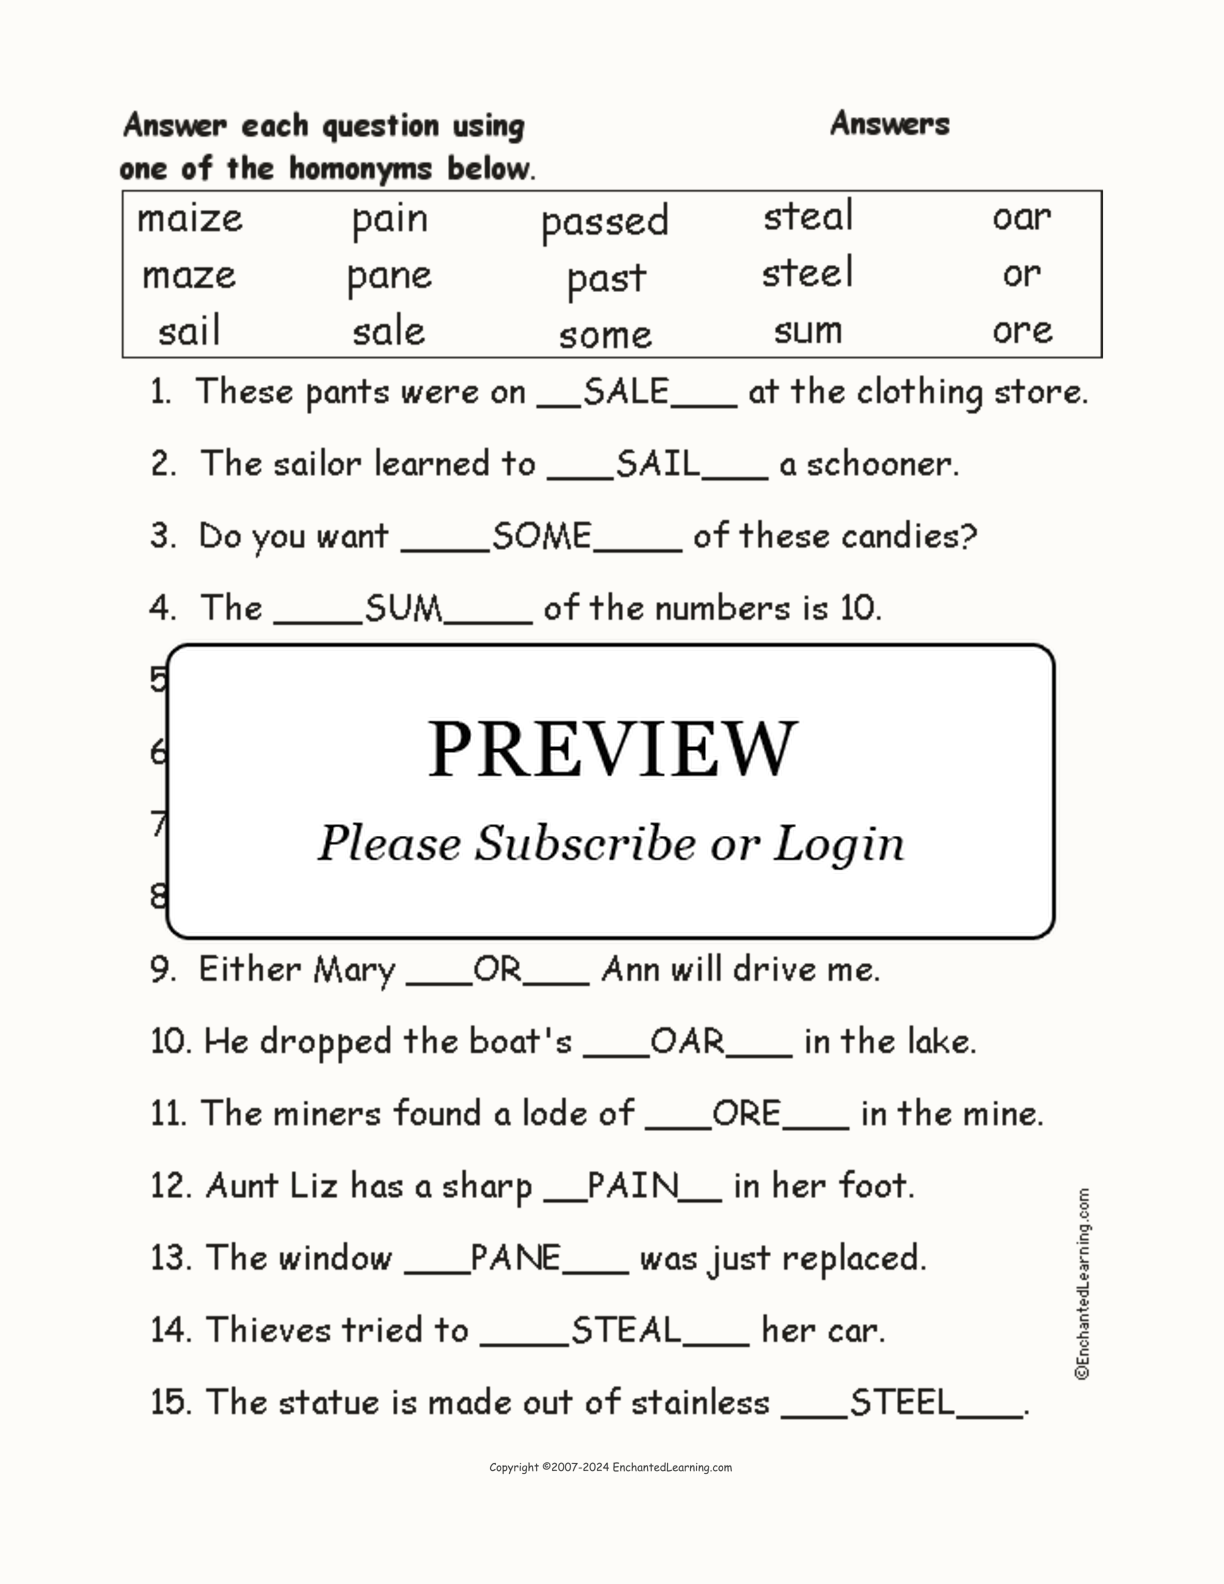 Homonyms Spelling Word Questions #5 interactive worksheet page 2